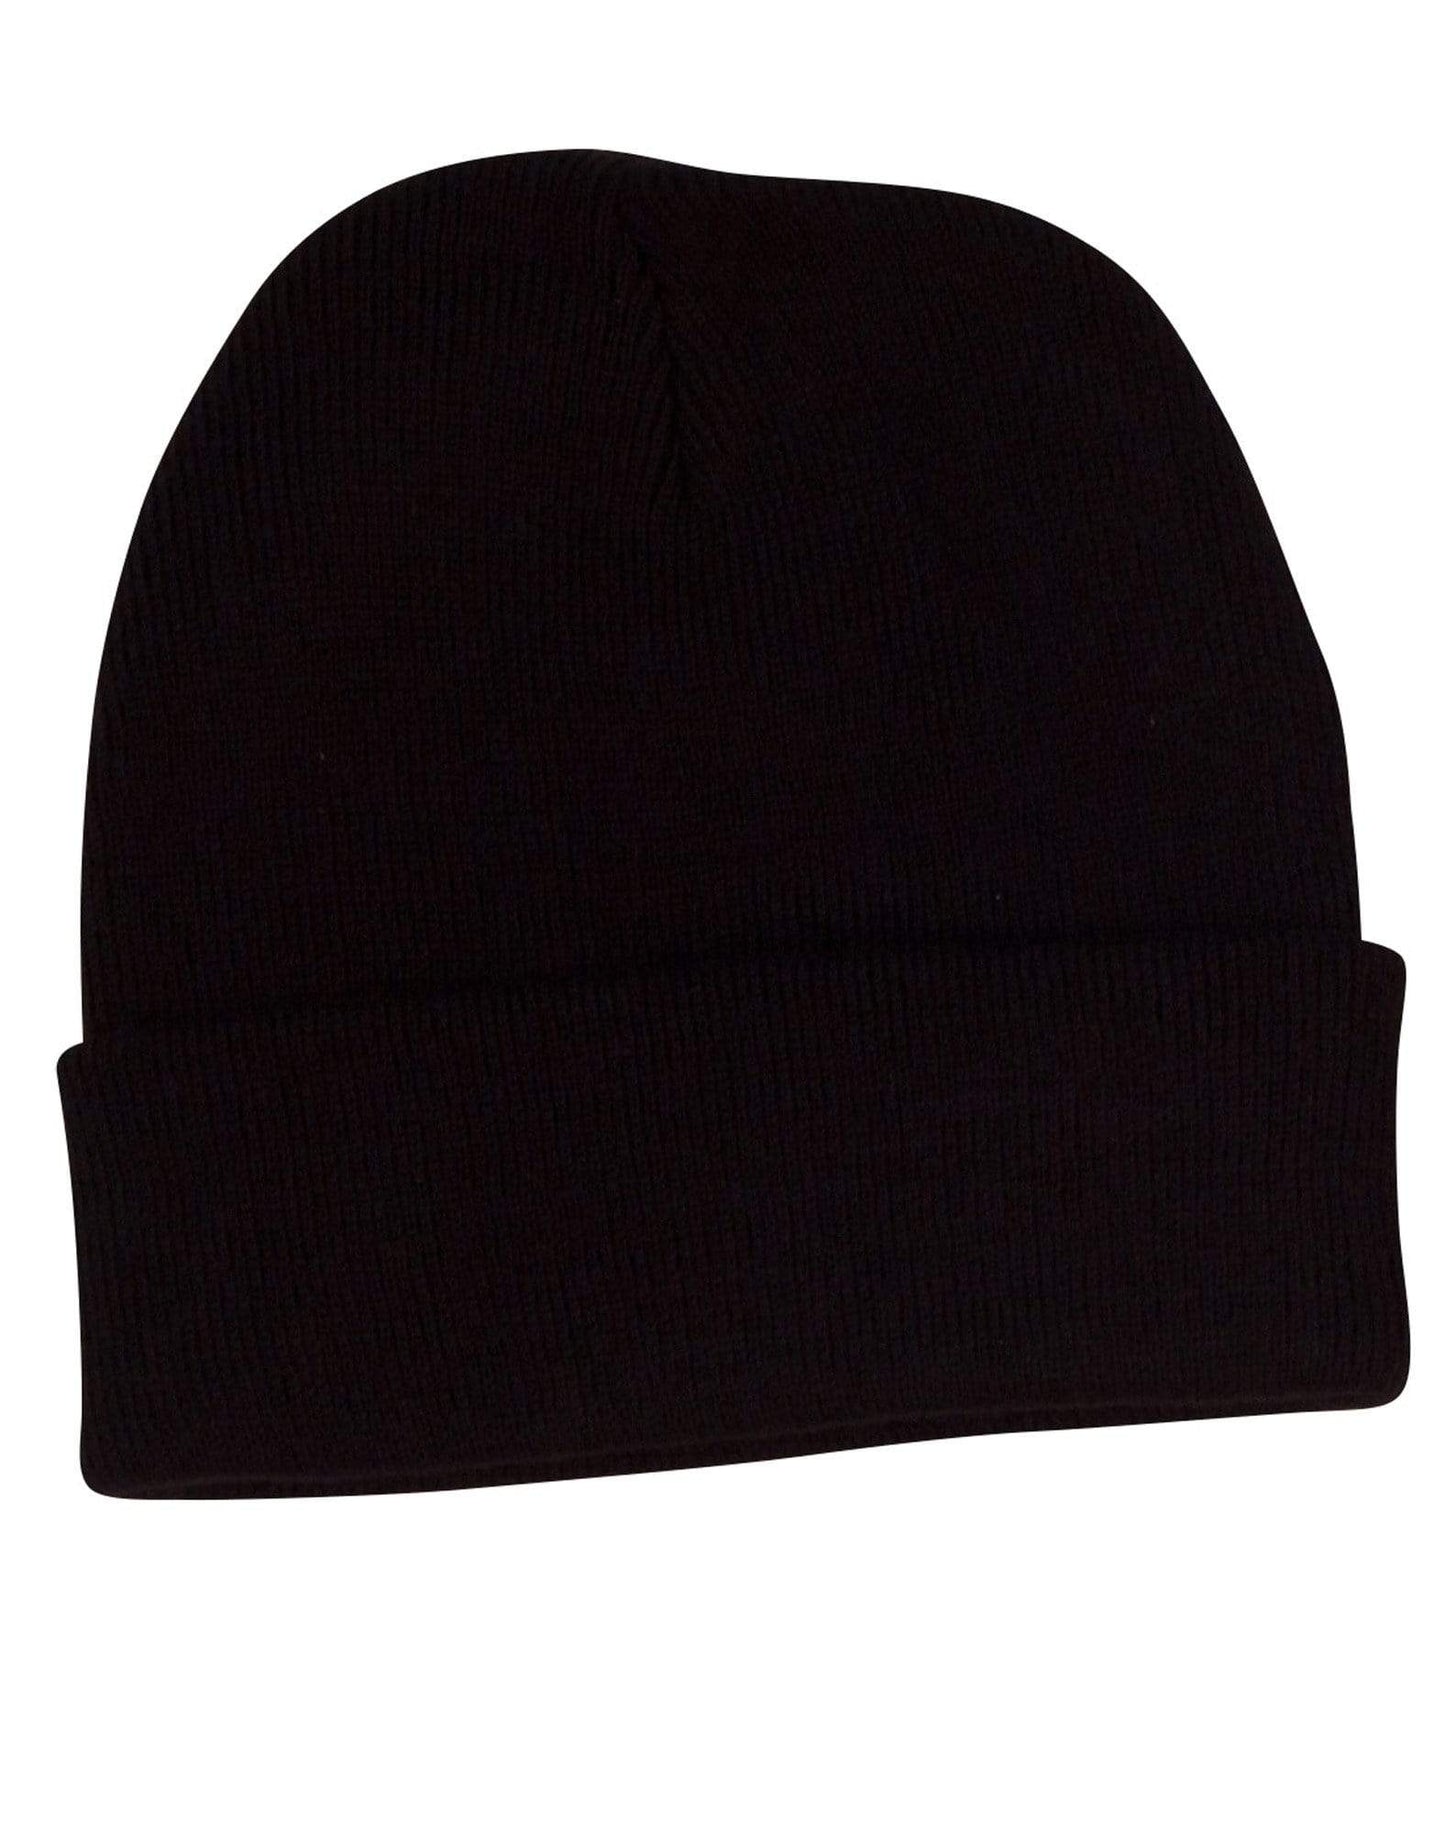 Roll Up Acrylic Beanie Ch28 Active Wear Winning Spirit Black One size fits most 